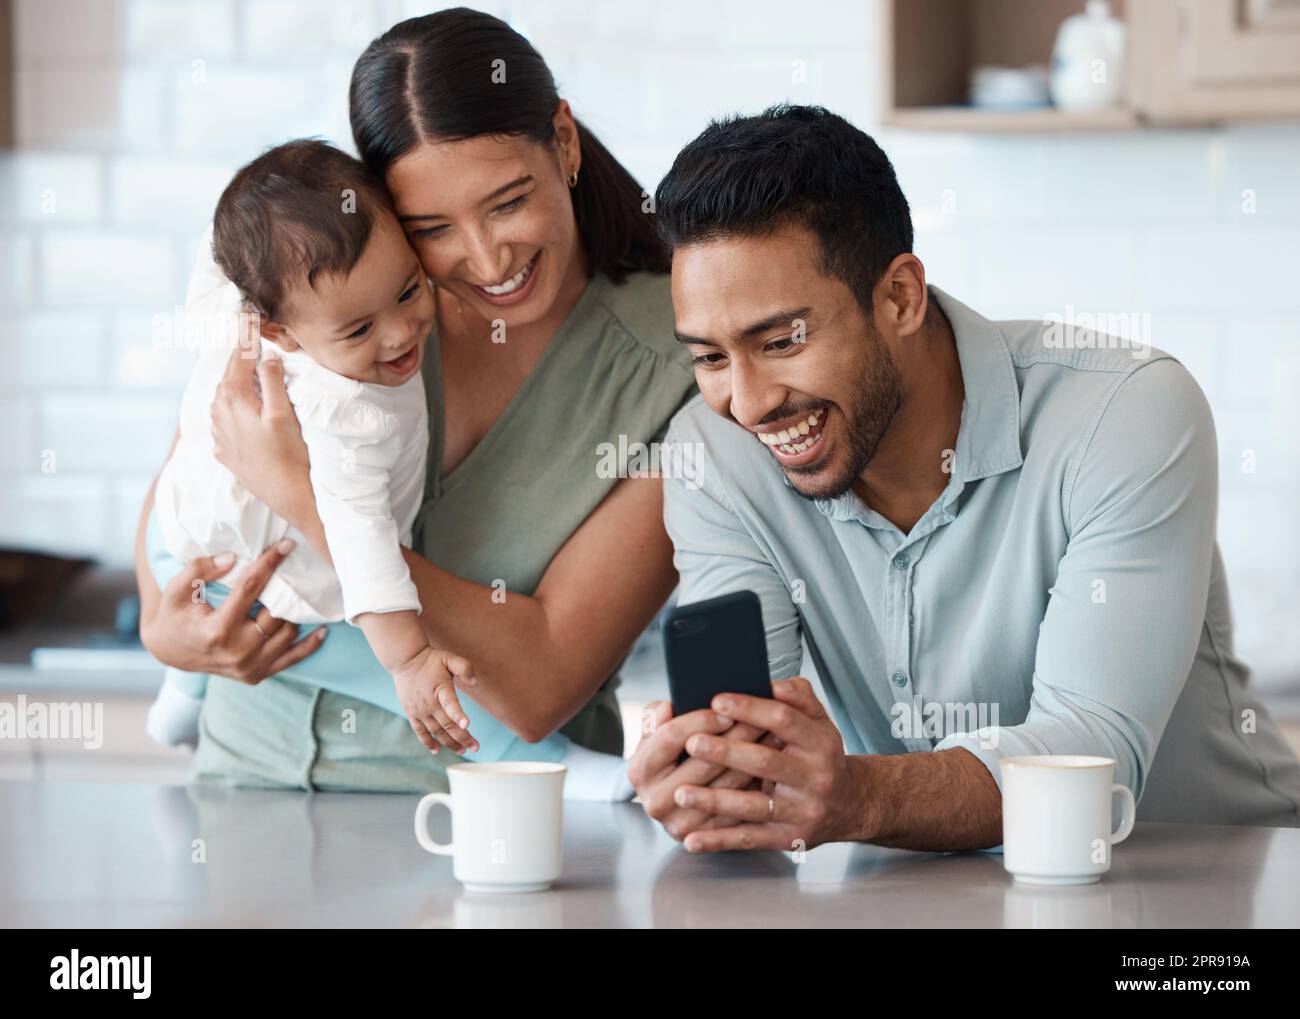 We just got exciting news. a young family spending time together at home. Stock Photo